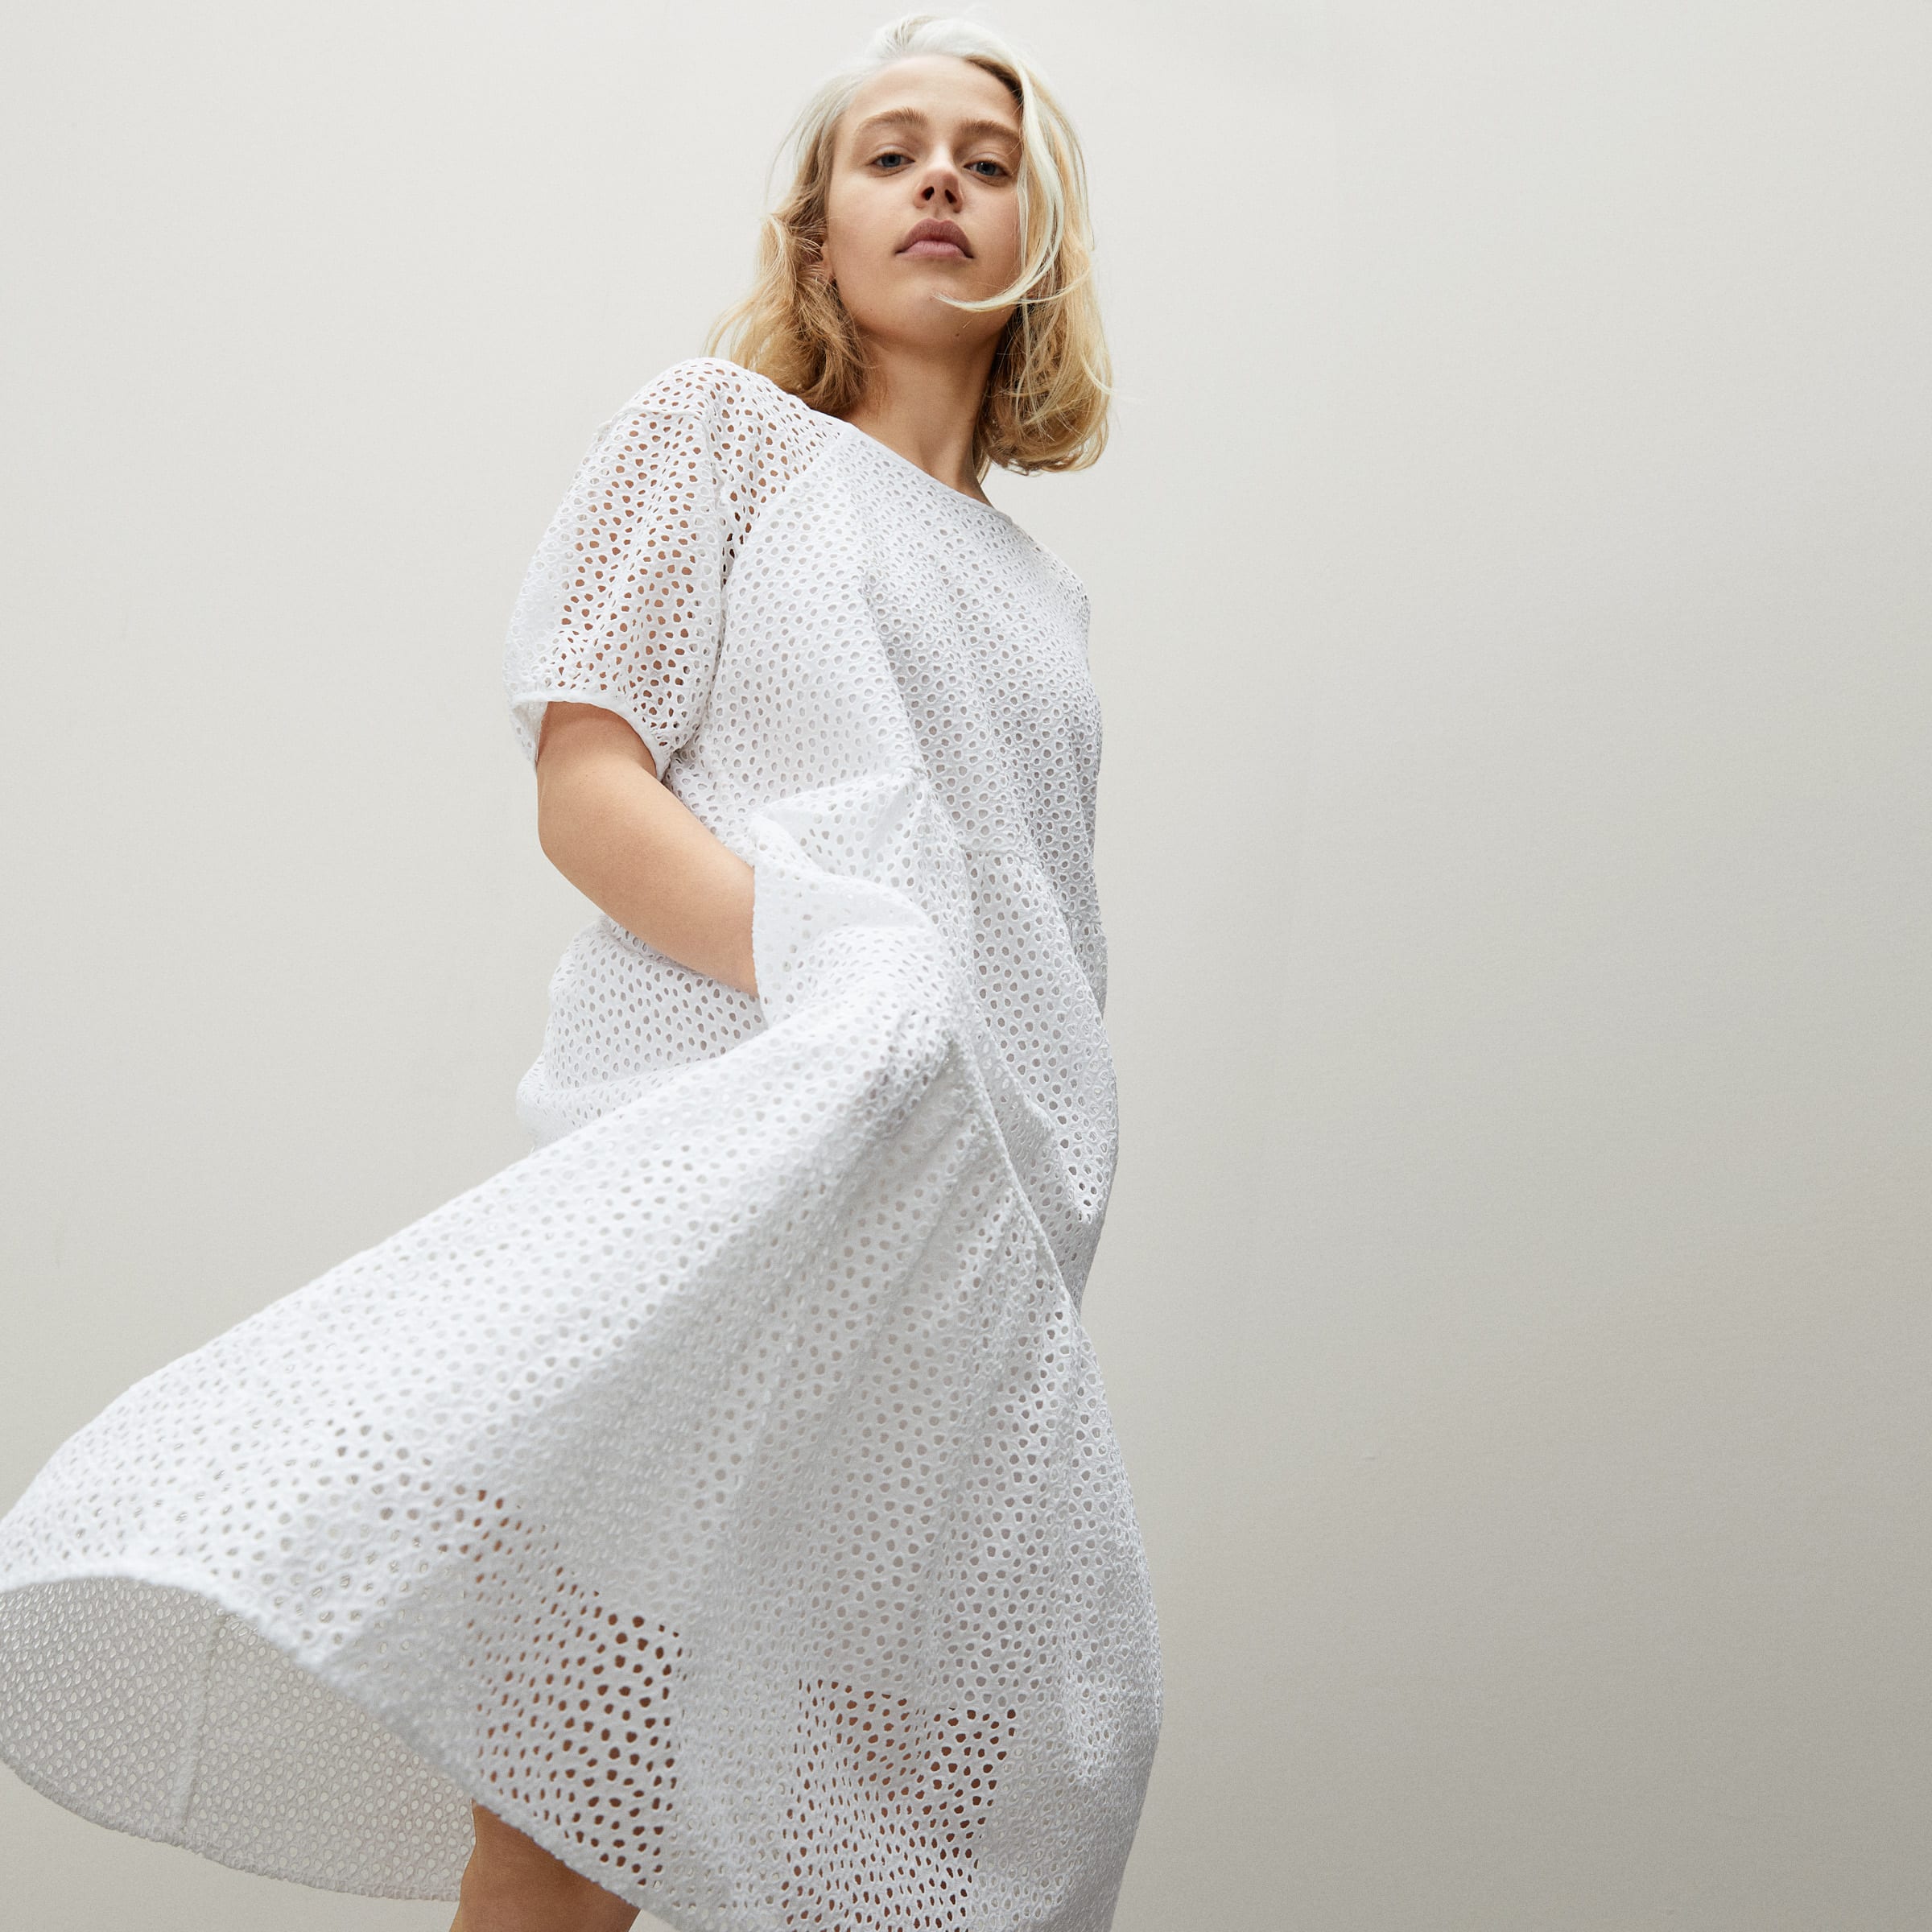 The Tiered Eyelet Dress –